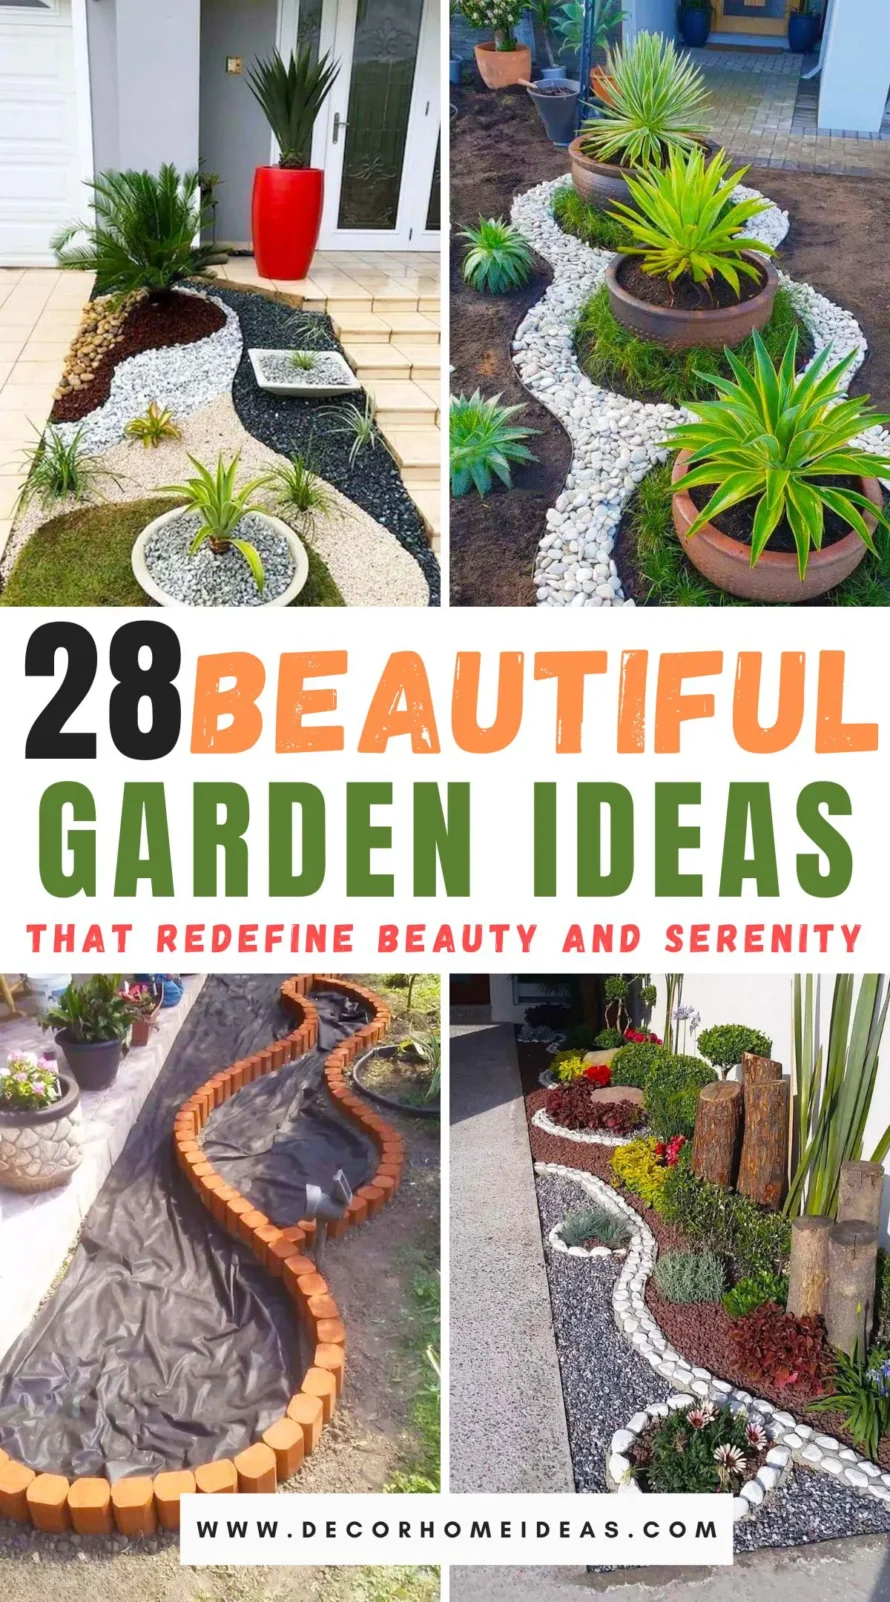 Explore 28 breathtaking gardens that redefine beauty and serenity, each uniquely crafted to inspire peace and admiration. Immerse yourself in landscapes that blend artistic design with nature's splendor, and discover tips to bring this tranquility into your own backyard.